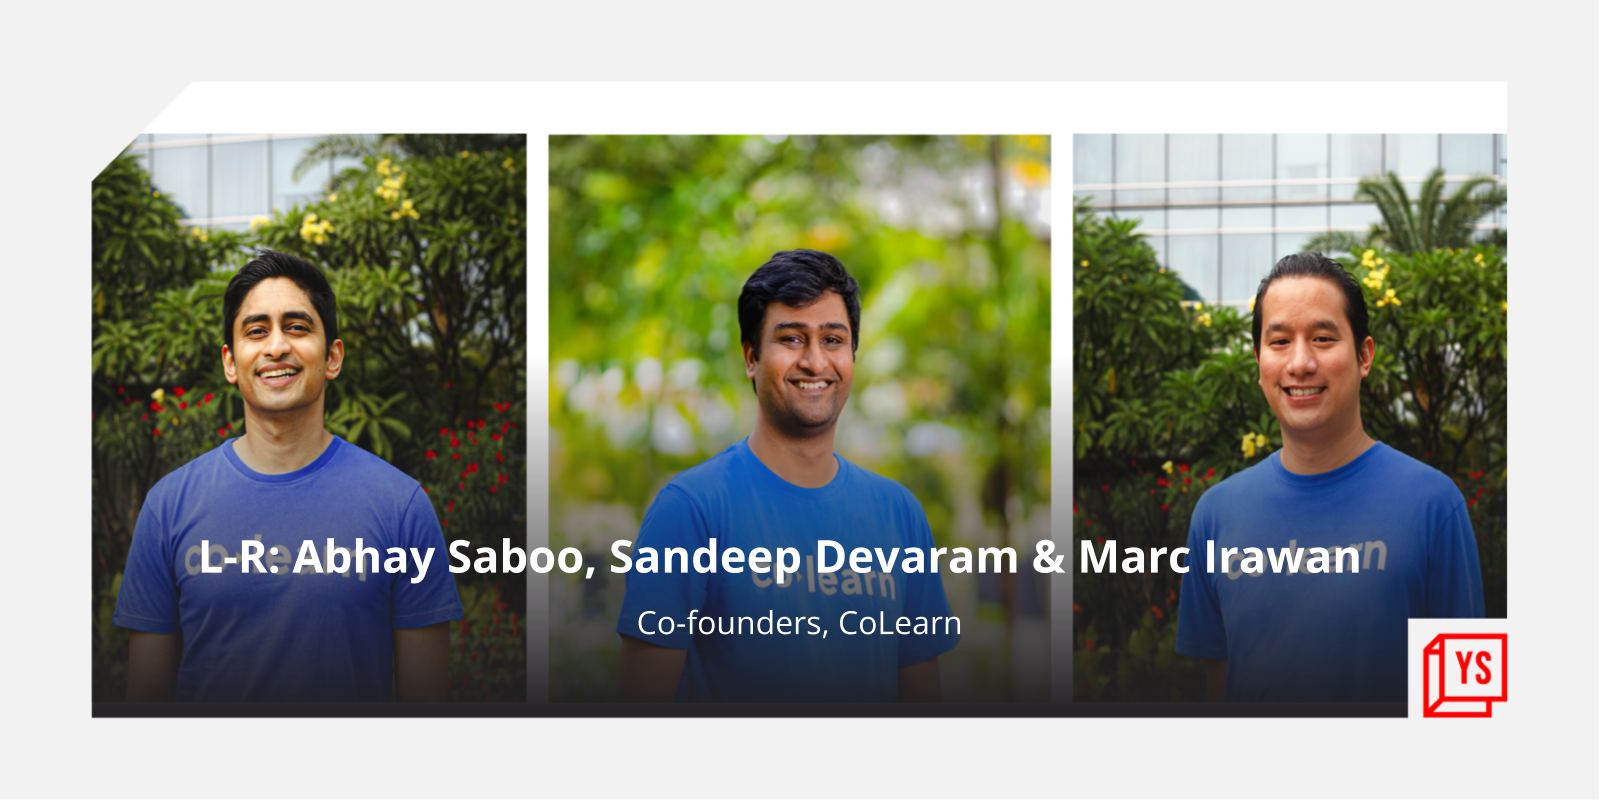 [Funding alert] Edtech startup CoLearn closes Series A round at $27M led by TNB Aura, KTB Network, others